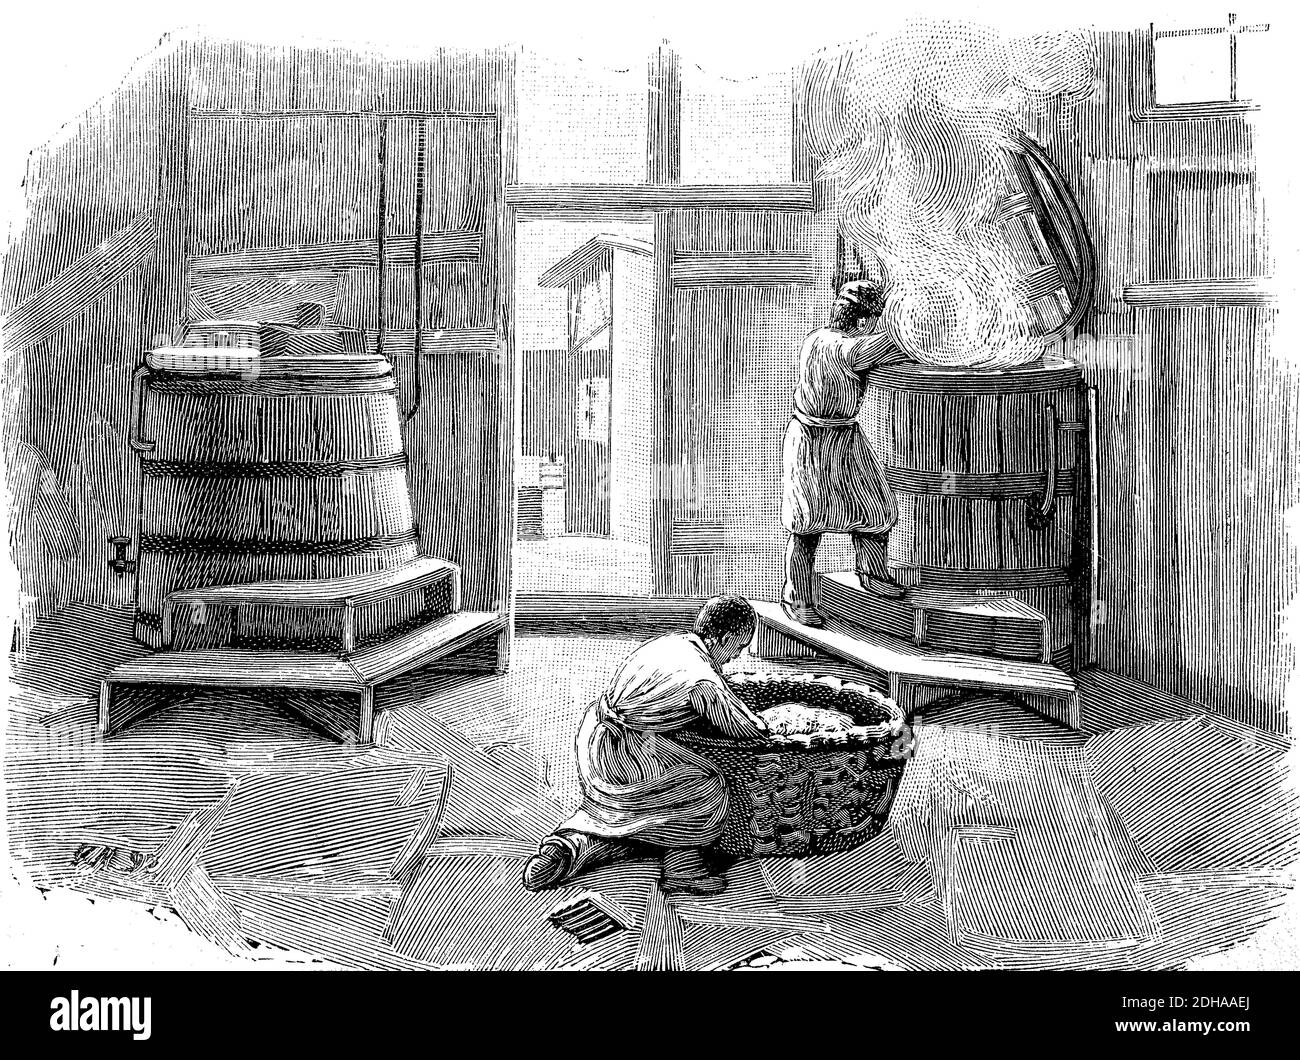 Disinfection room in a cholera barracks, cholera epidemic, 1892, Hamburg, Germany  /  Desinfektionsraum in einer Cholera Baracke, Cholera-Epidemie, 1892, Hamburg, Deutschland, historical, digital improved reproduction of an original from the 19th century / digitale Reproduktion einer Originalvorlage aus dem 19. Jahrhundert, Stock Photo